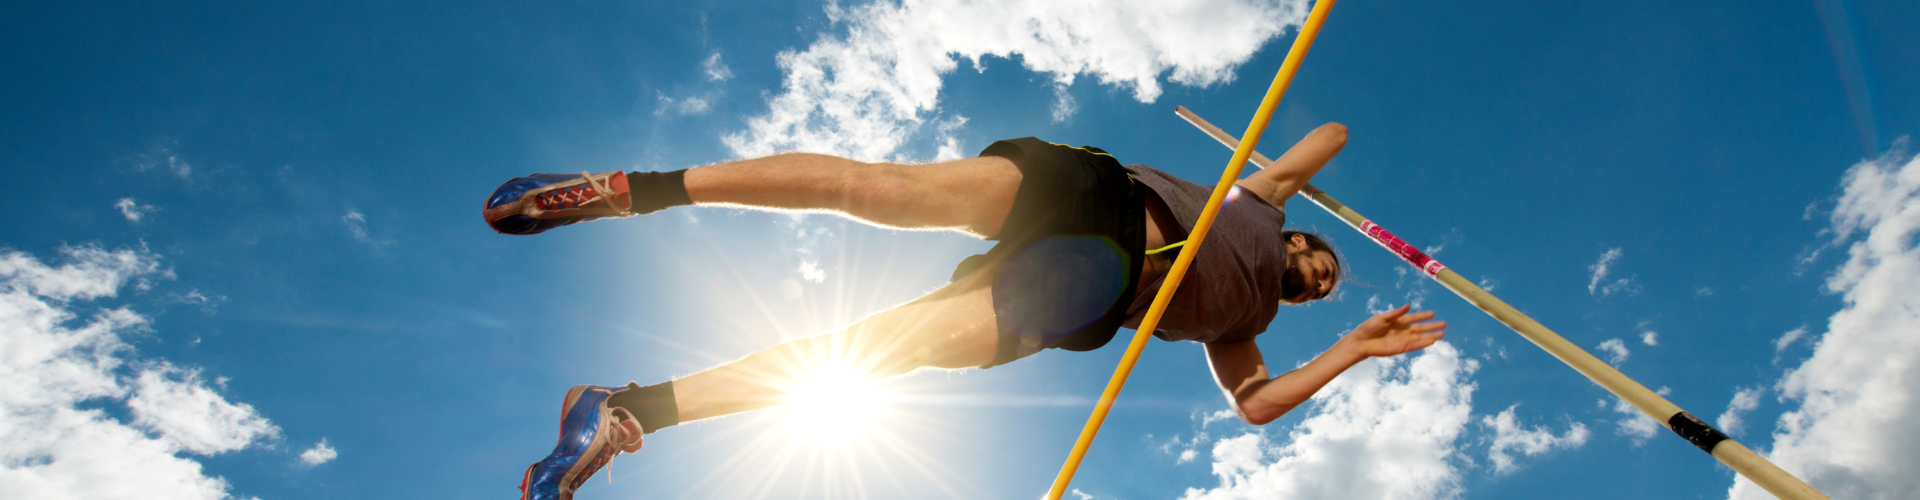 Below view of a young athlete at pole vault competition.